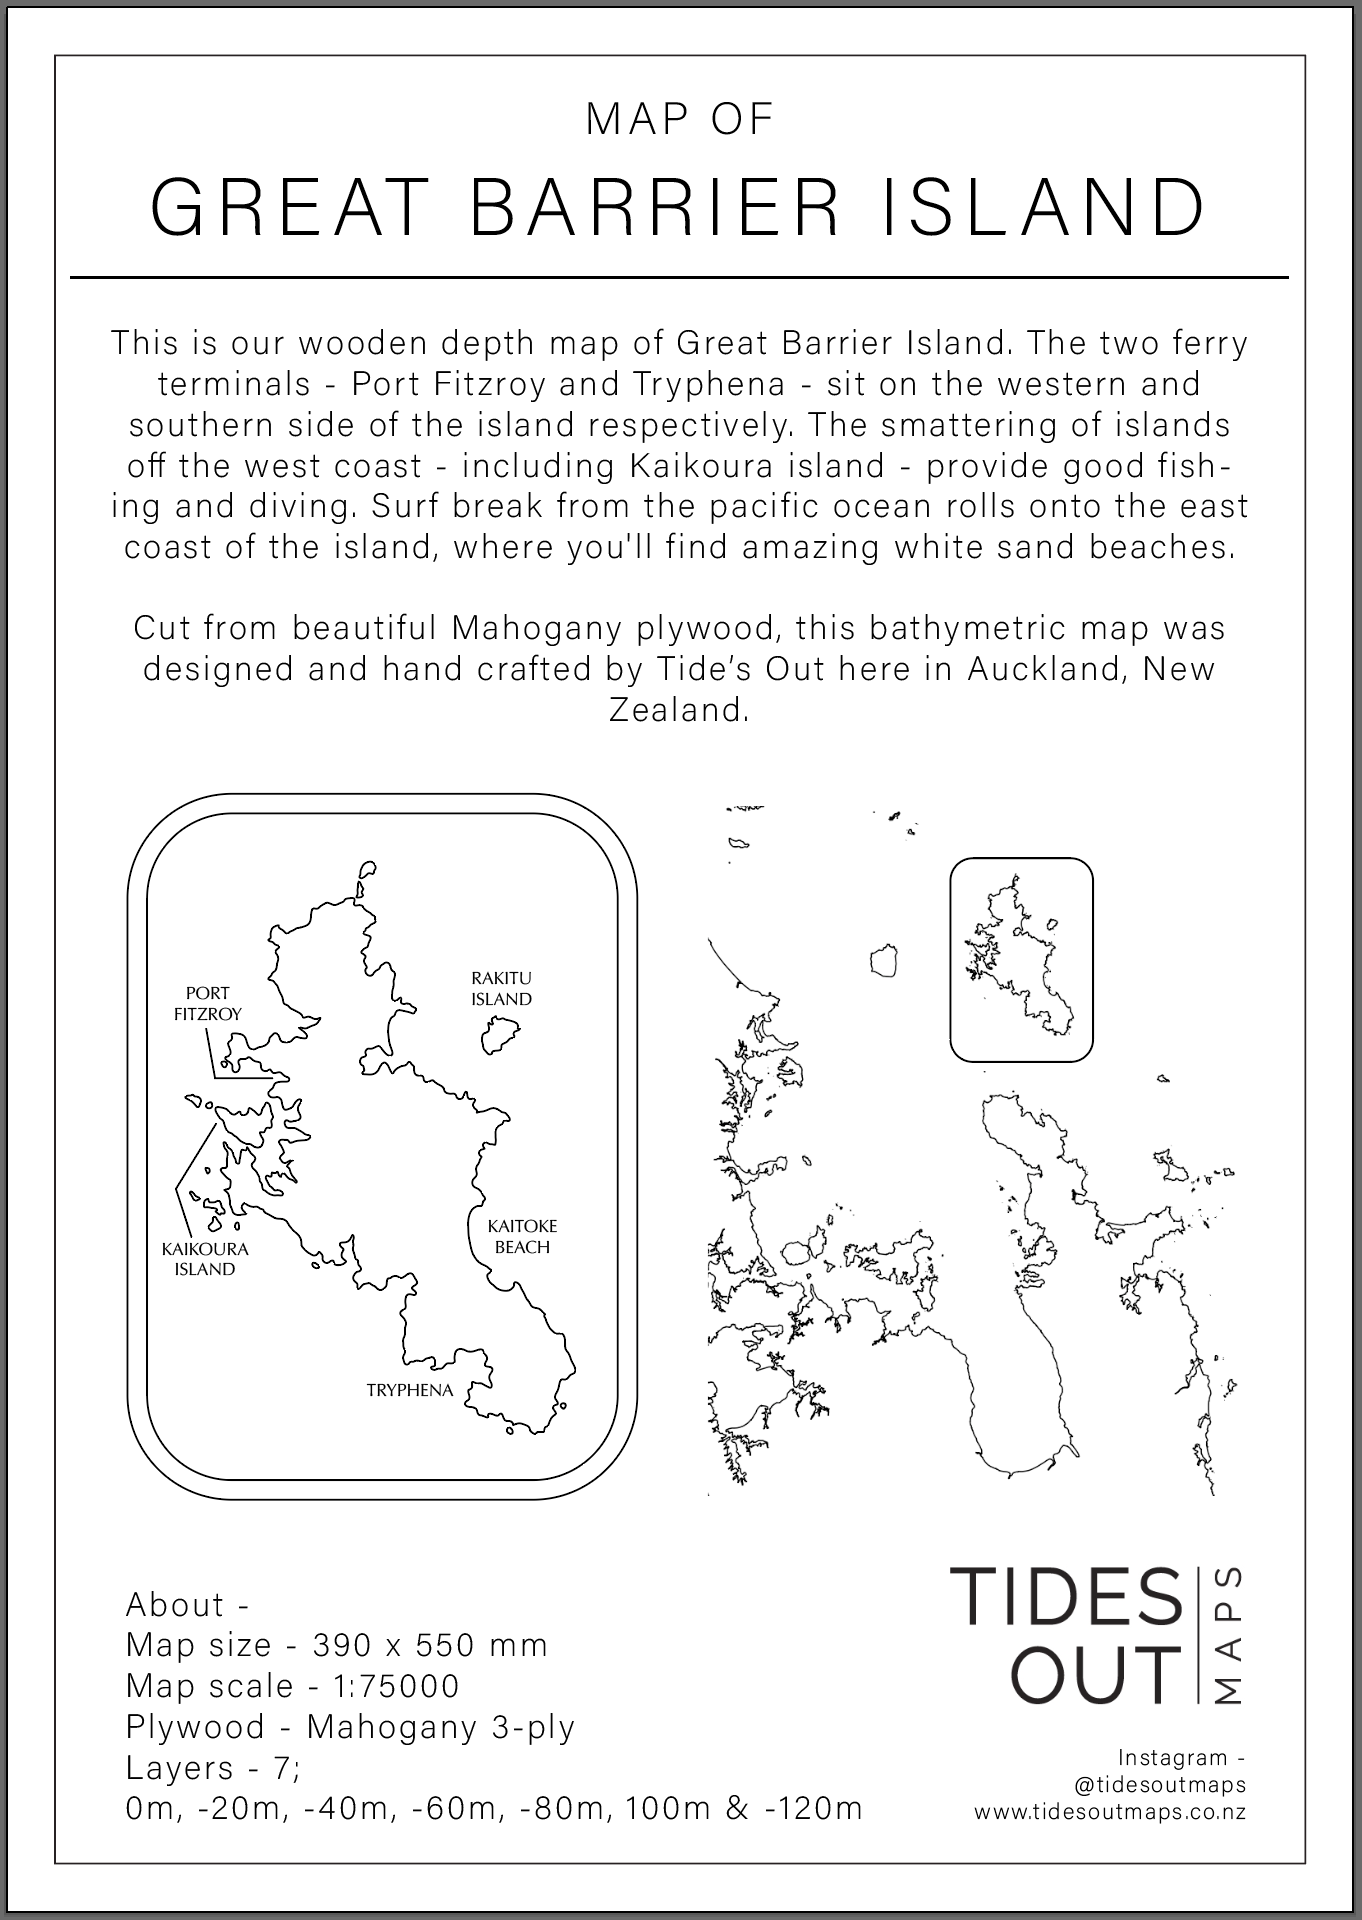 Great Barrier Island - Tide's Out Maps